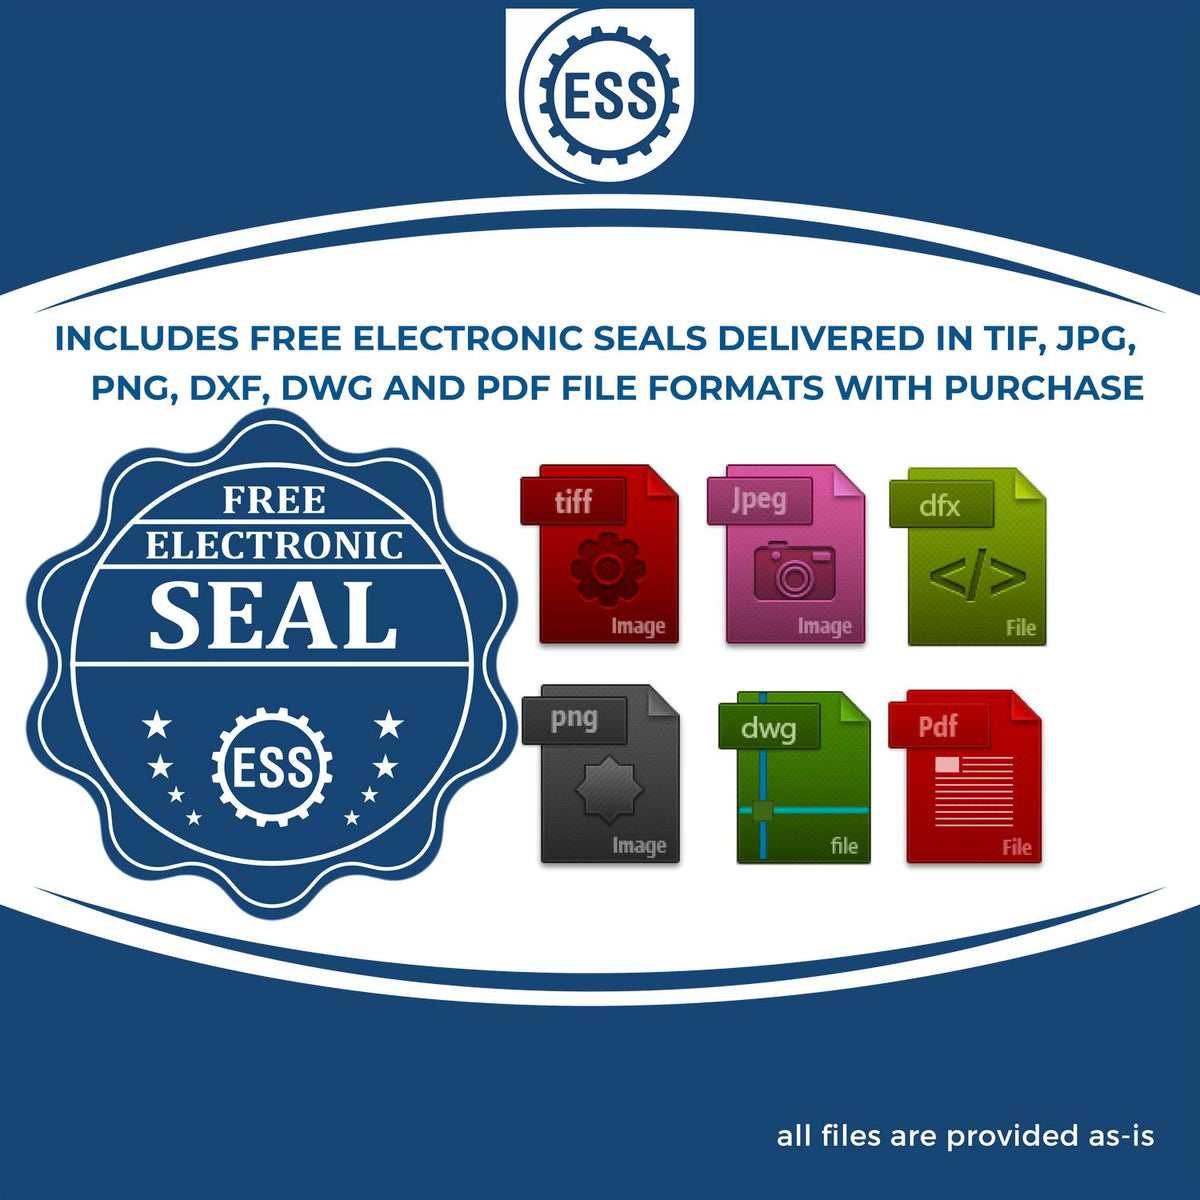 An infographic for the free electronic seal for the Washington Professional Engineer Seal Stamp illustrating the different file type icons such as DXF, DWG, TIF, JPG and PNG.